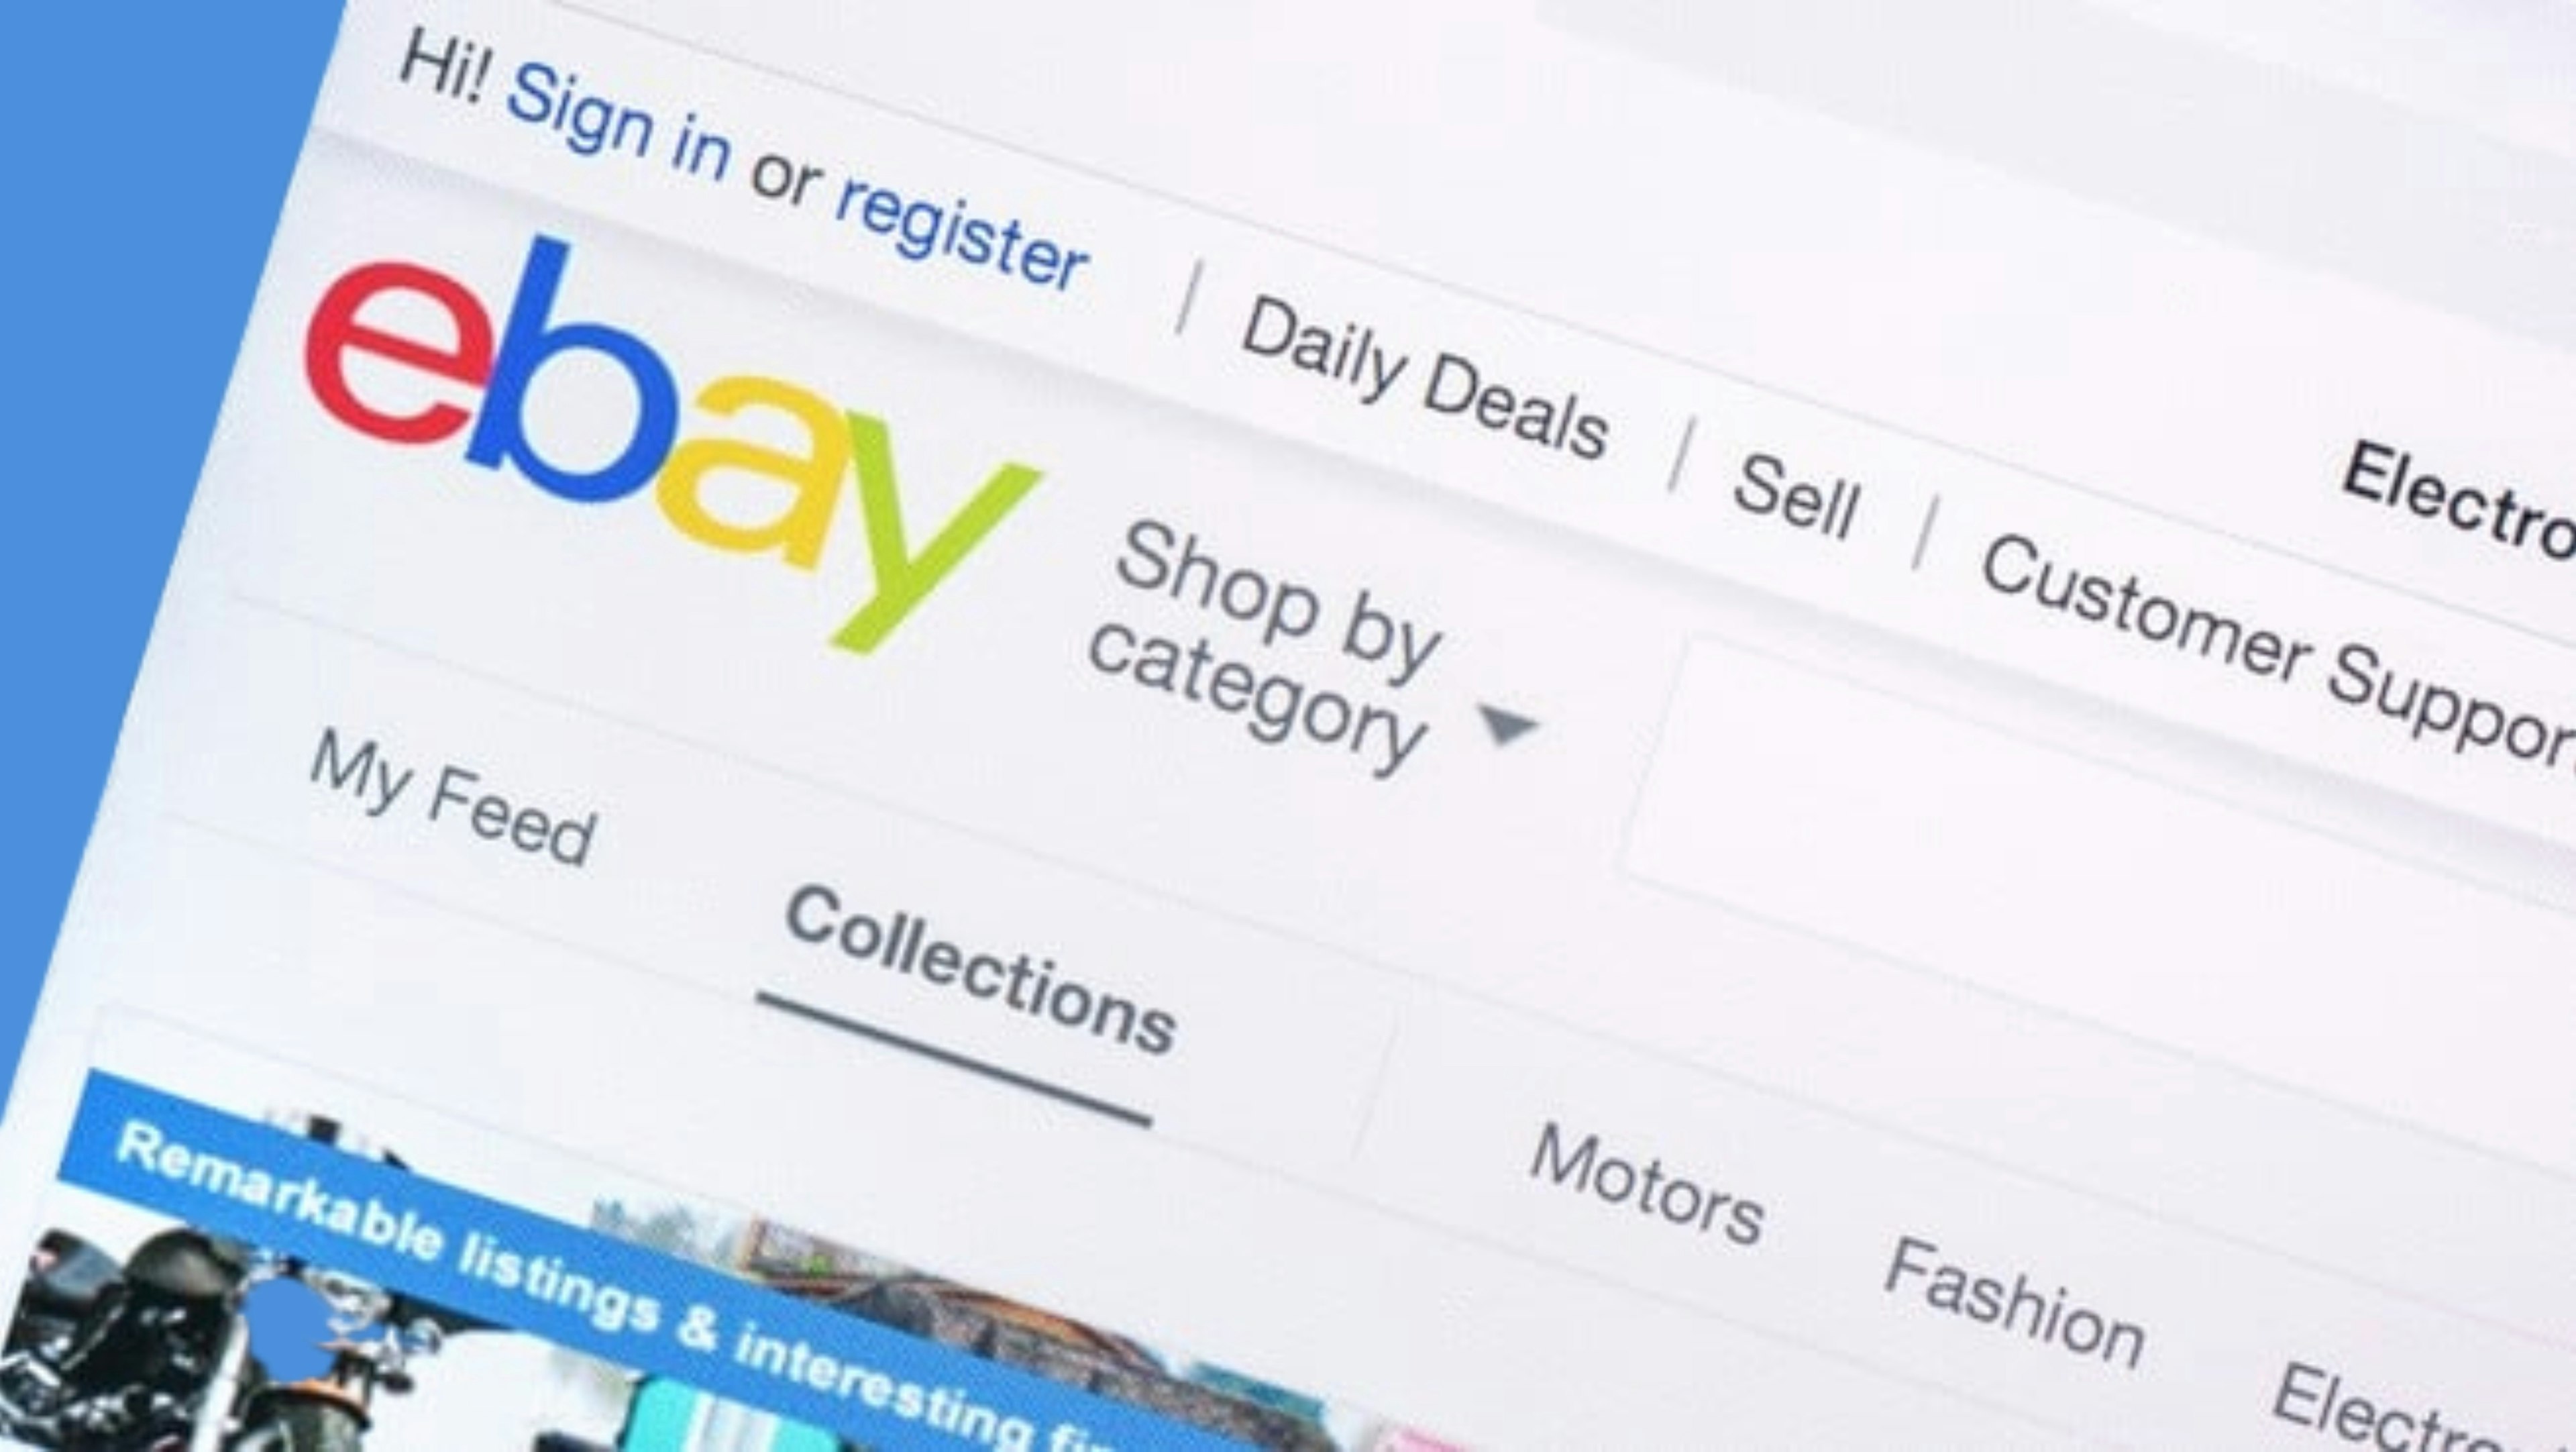 A computer screen displaying the eBay website and a hand holding a credit card while filling out the payment details. The eBay search bar and search results for 'smartwatch' are also visible on the screen.